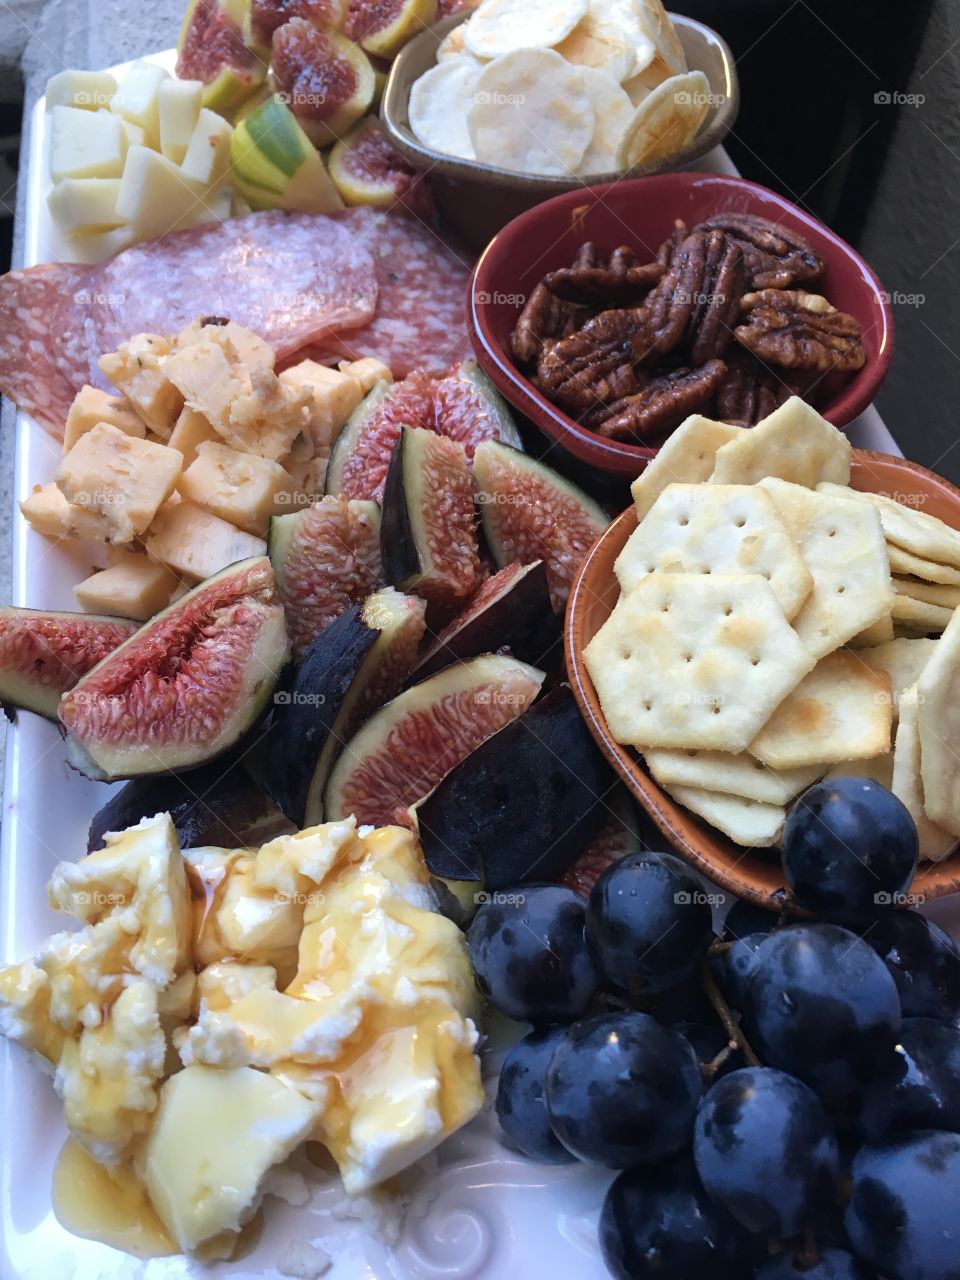 Cheese and figs